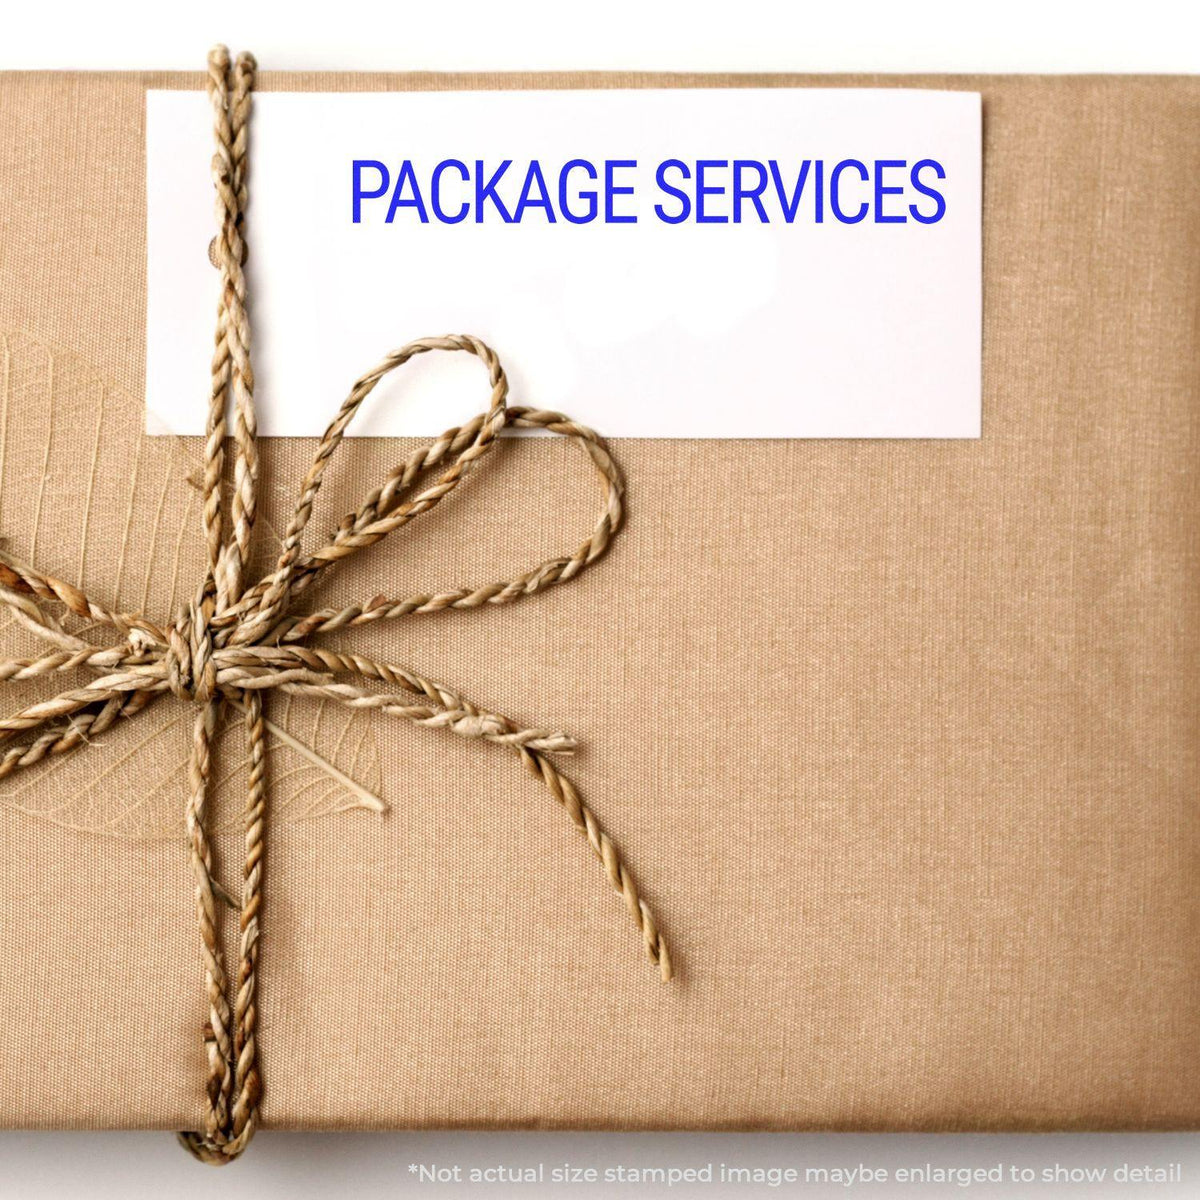 In Use Large Package Services Rubber Stamp Image